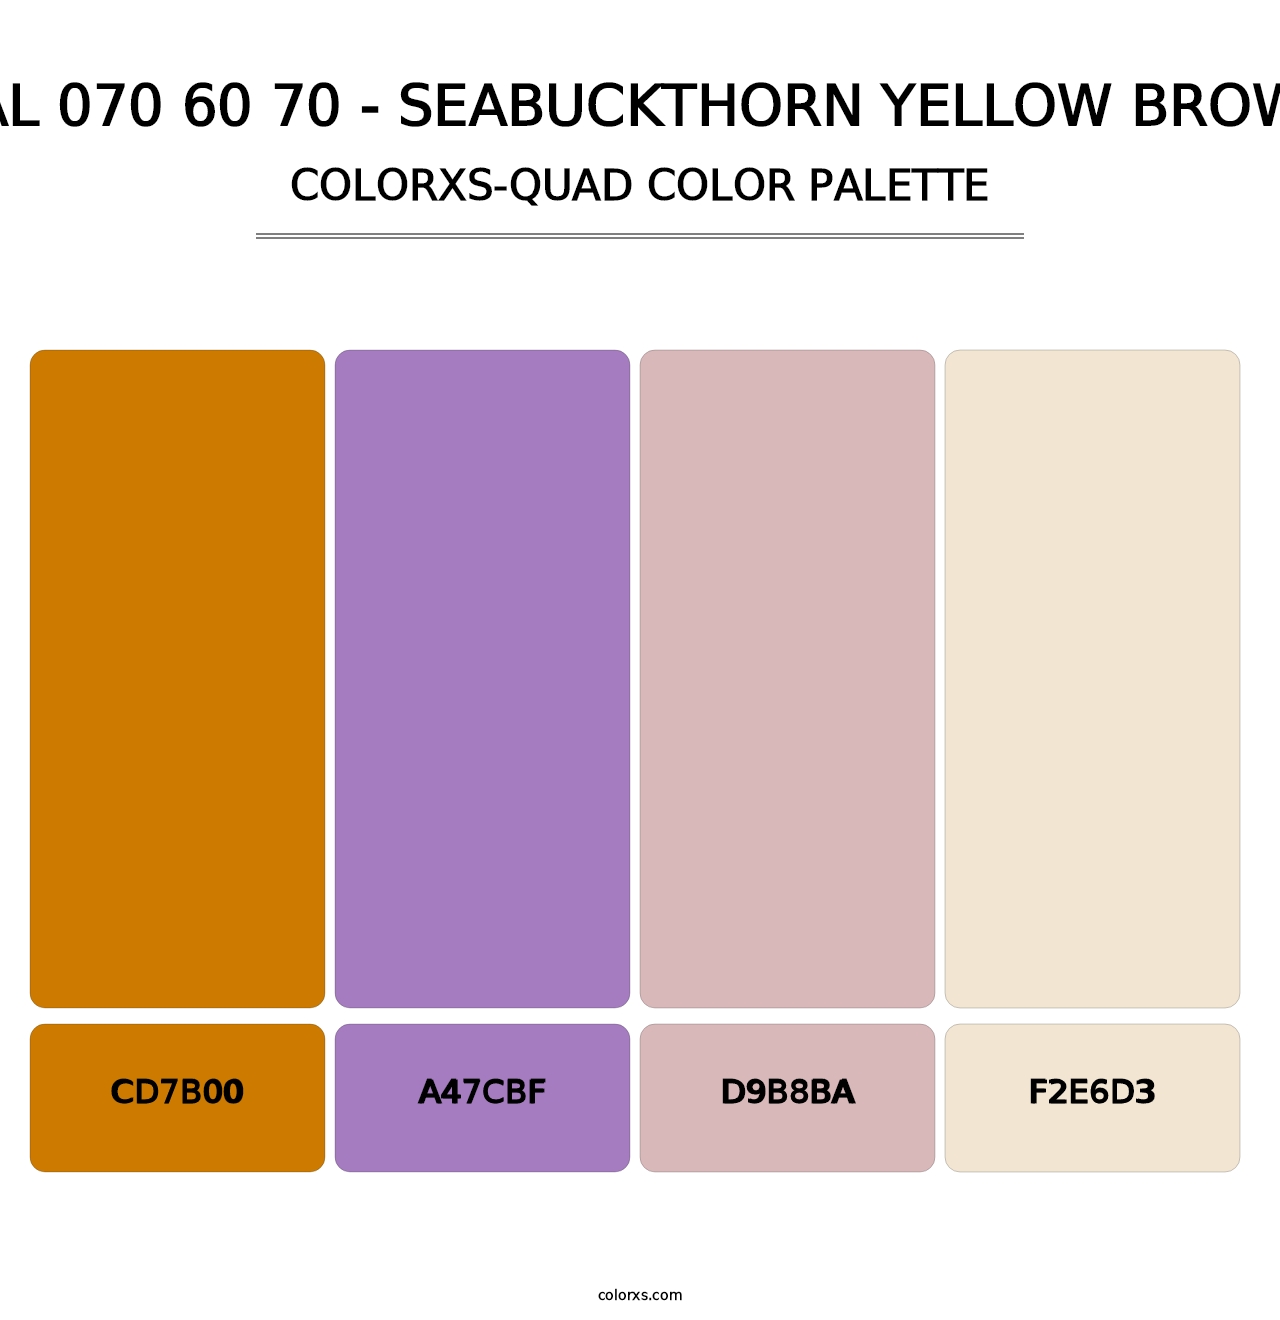 RAL 070 60 70 - Seabuckthorn Yellow Brown - Colorxs Quad Palette